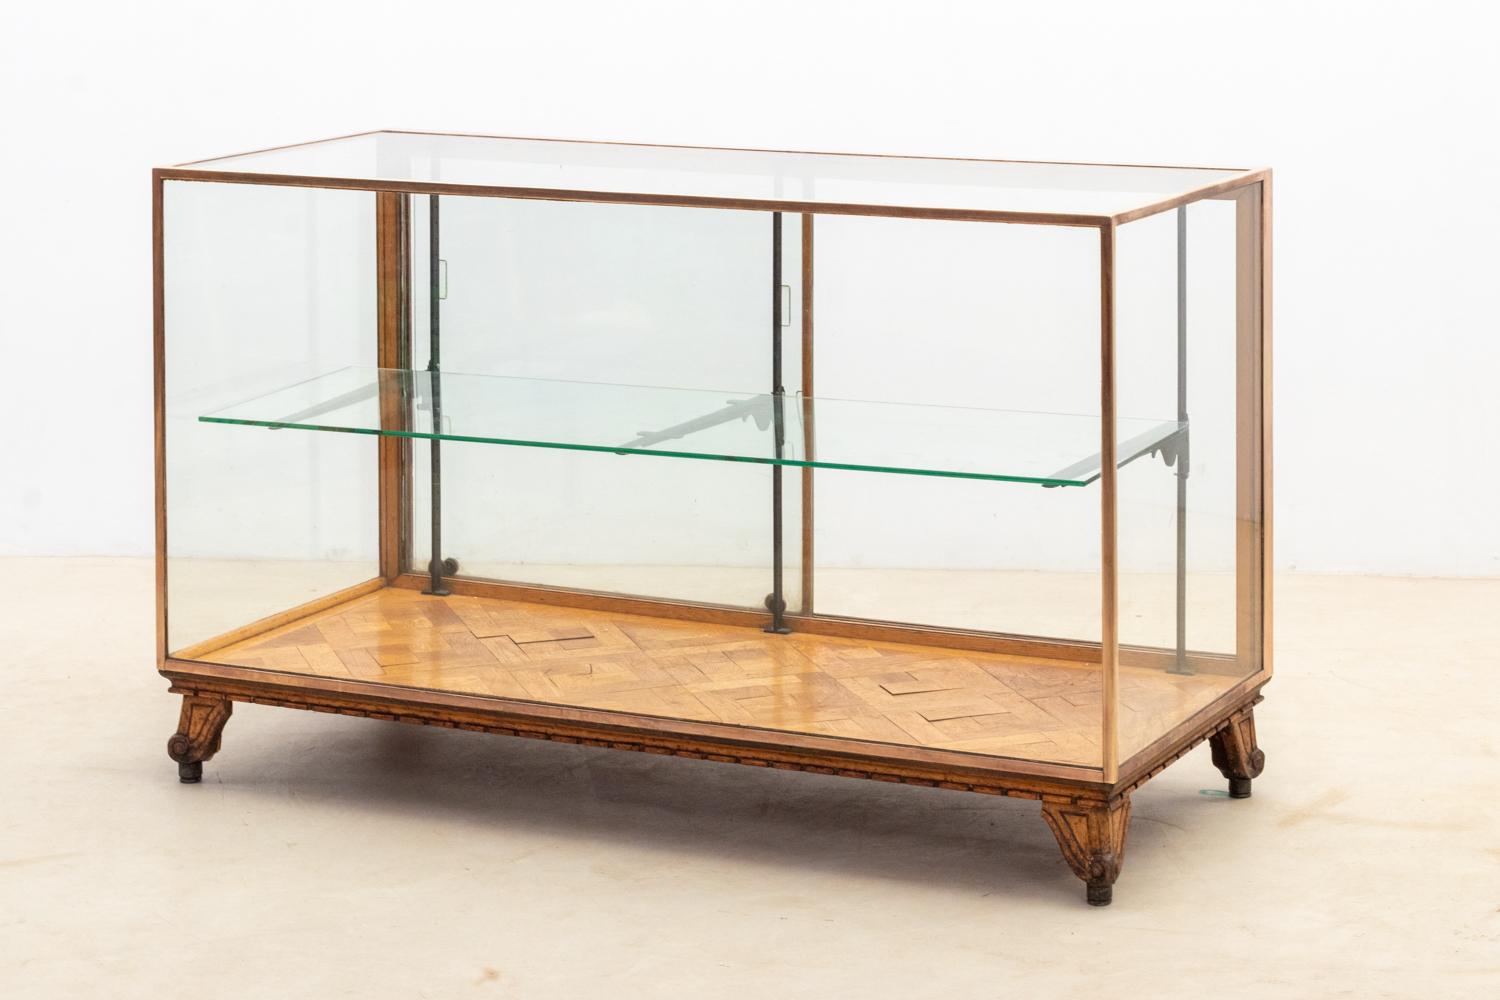 This classic antique display cabinet/shop counter, is a piece crafted from oak and brass. 
It features two sliding doors on the backside, providing  functionality. 
The shelves within this cabinet are adjustable, allowing for customizable display